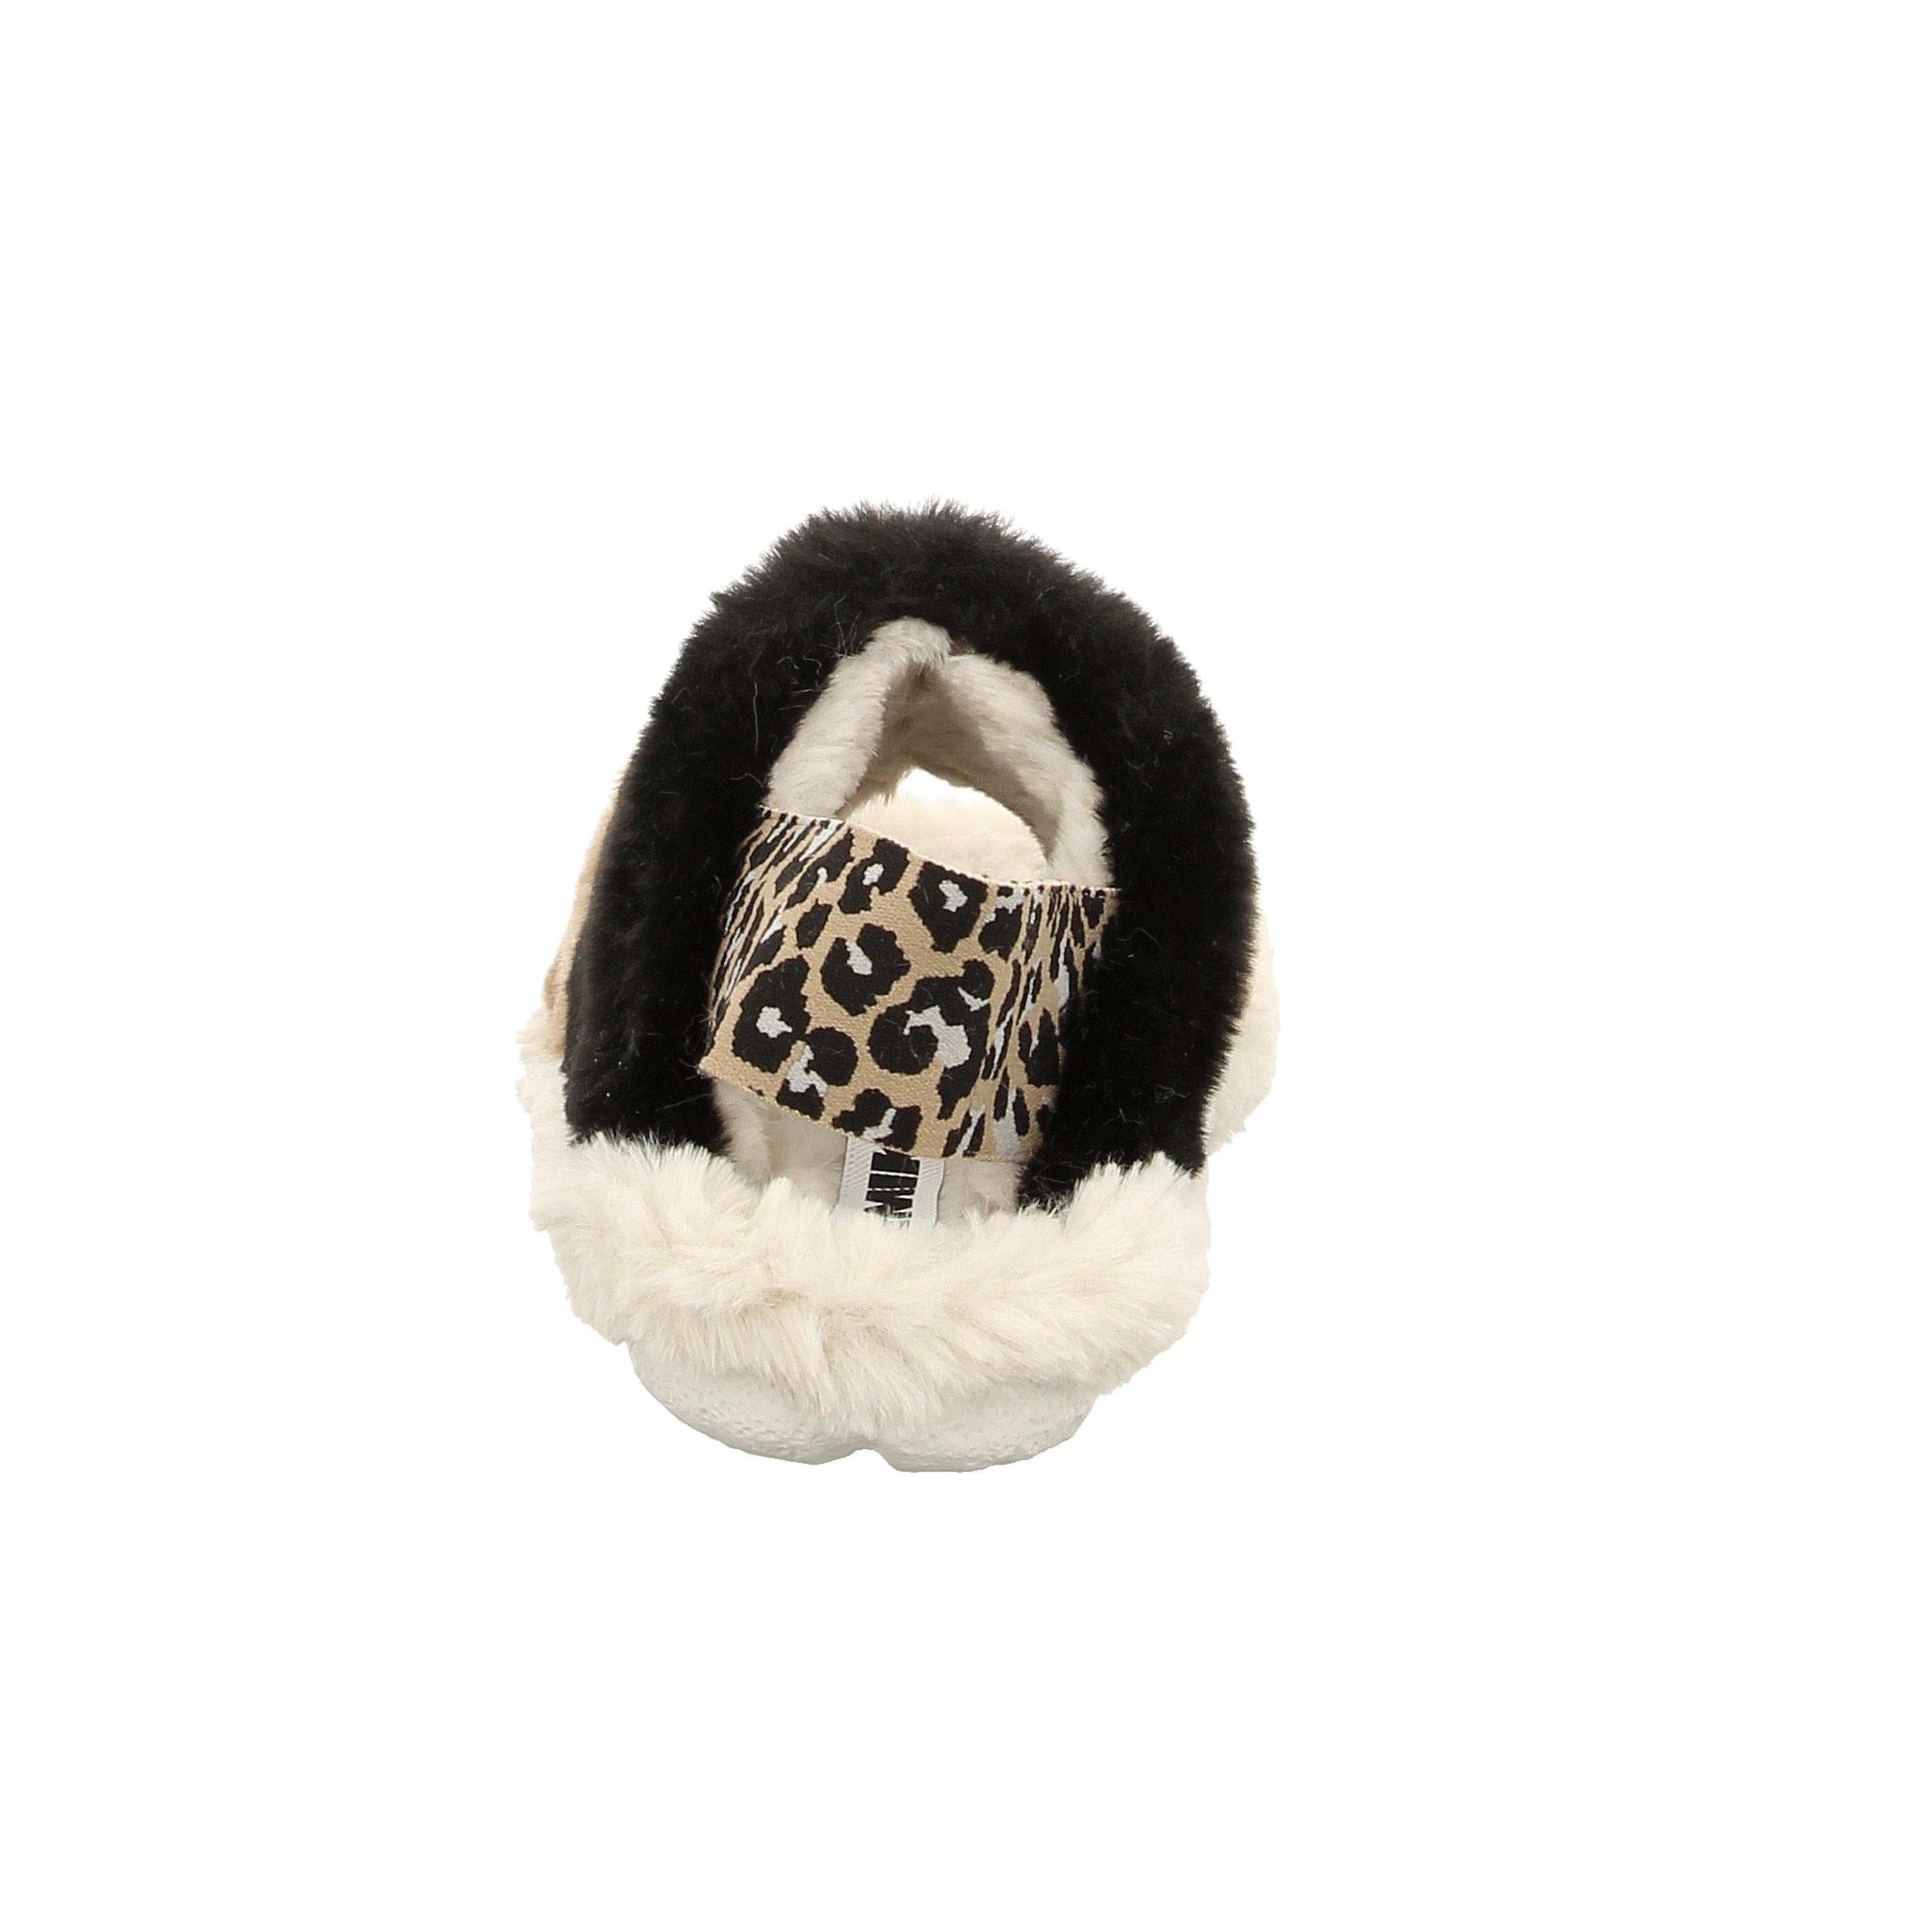 Slipper style LILLE 104 by Romika USA